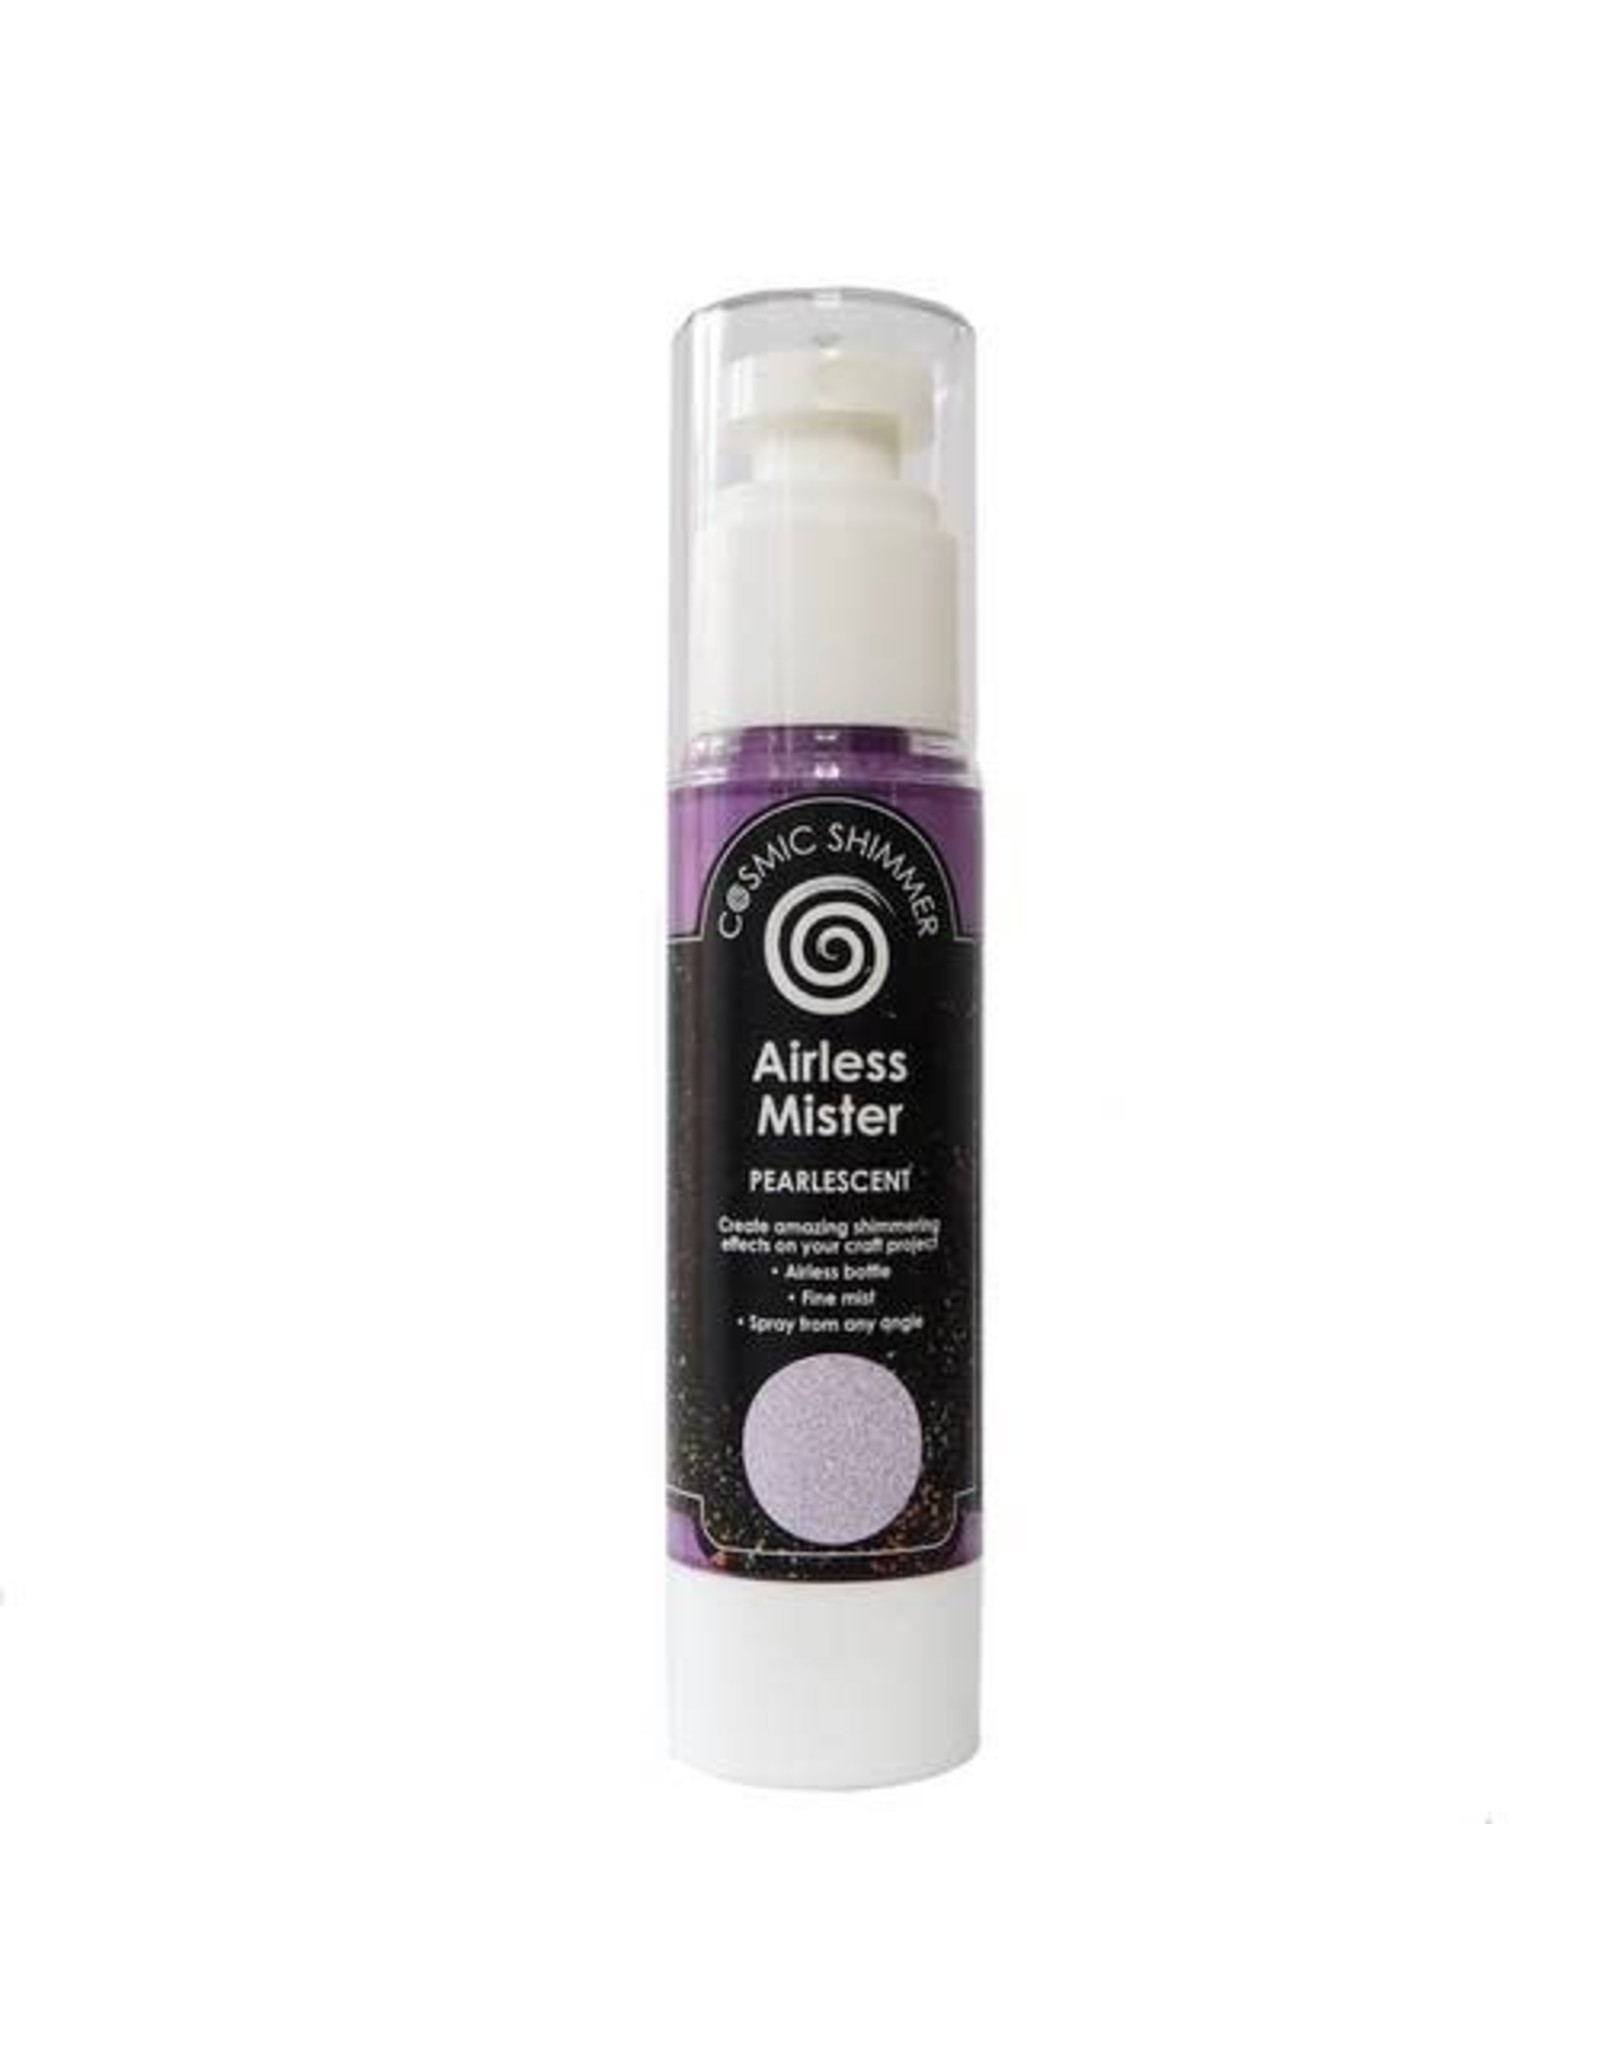 CREATIVE EXPRESSIONS CREATIVE EXPRESSIONS COSMIC SHIMMER LAVENDER RAIN PEARESCENT AIRLESS MISTERS 50ml